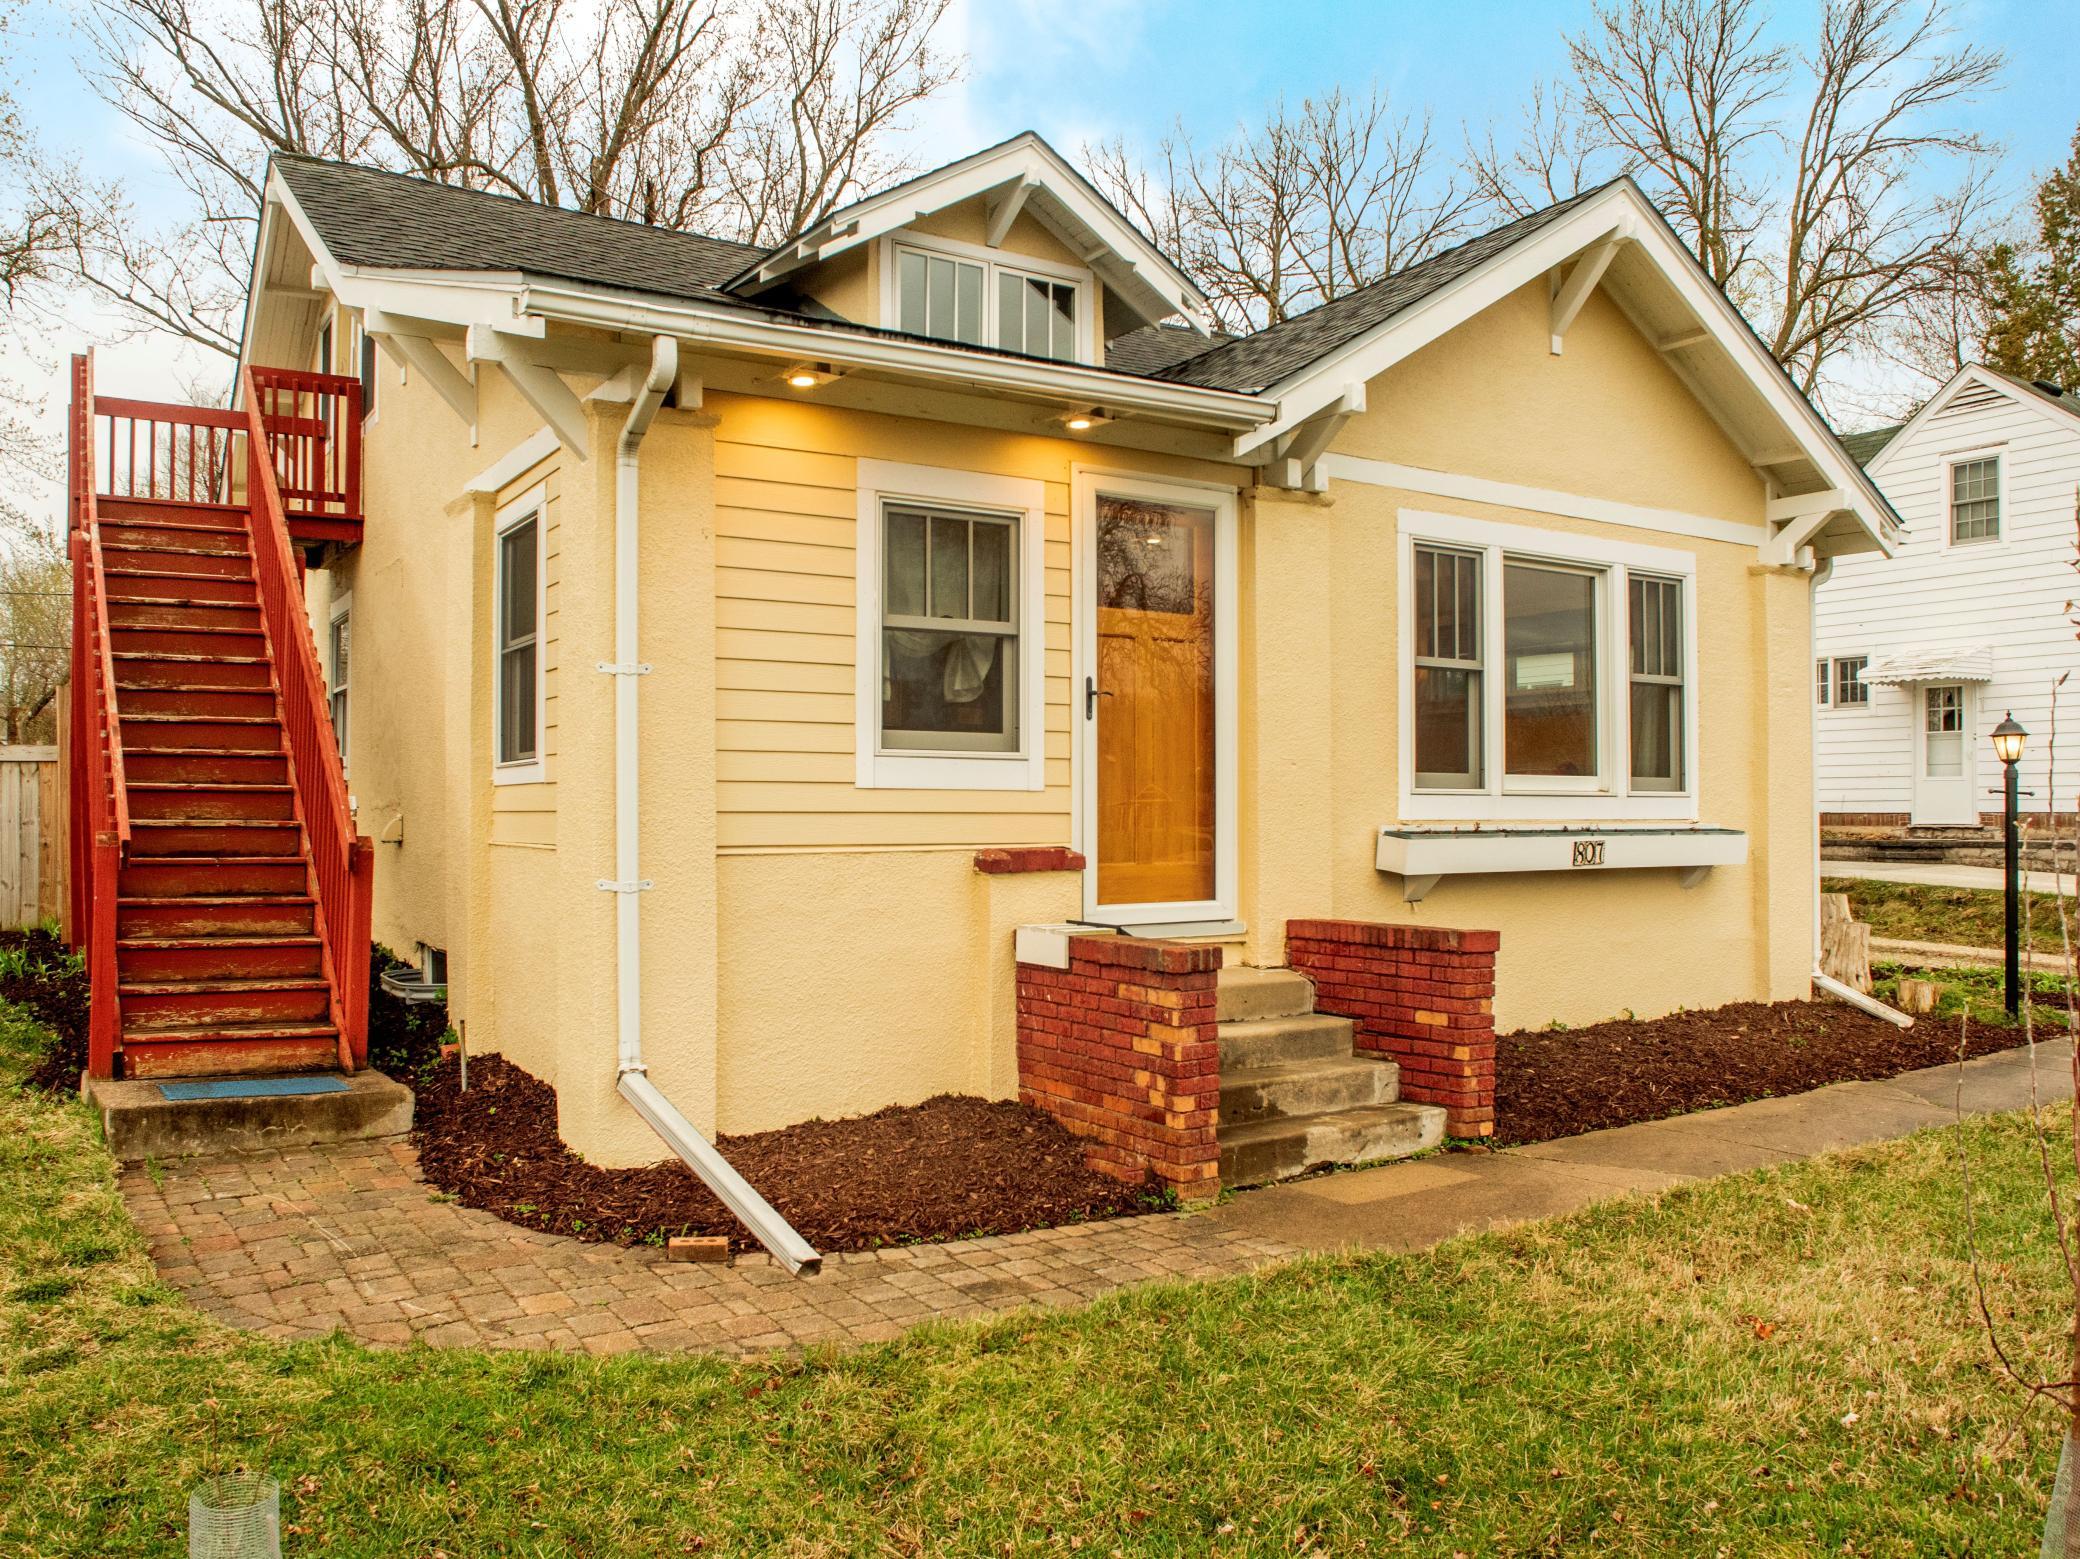 Charming cottage-style Northfield home with great curb appeal!